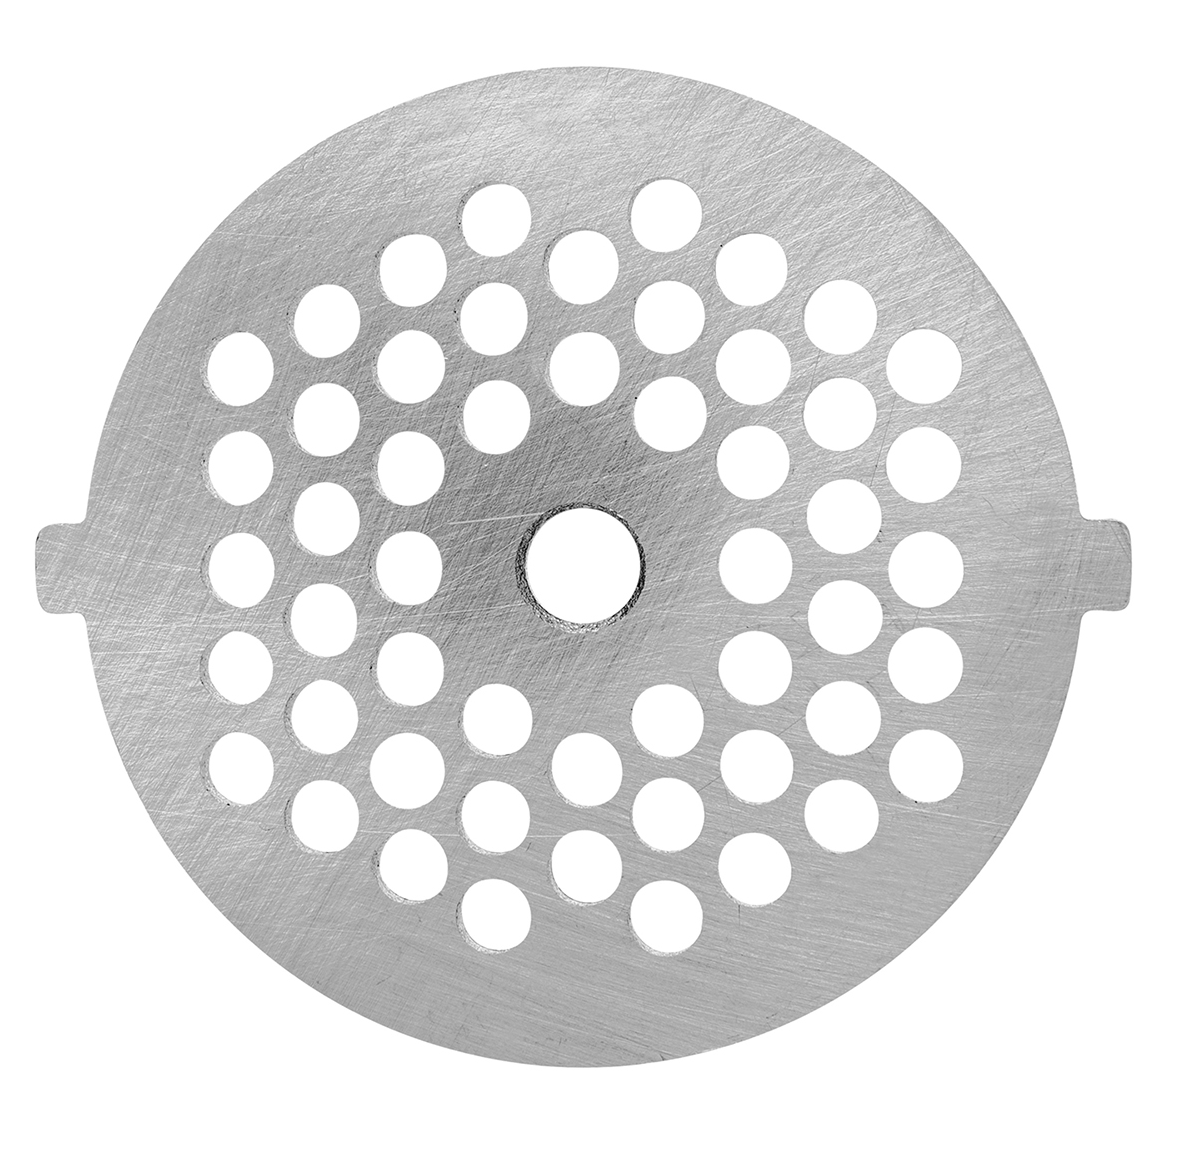 5mm Stainless Steel Cutting Plate for the Luvele Meat grinder